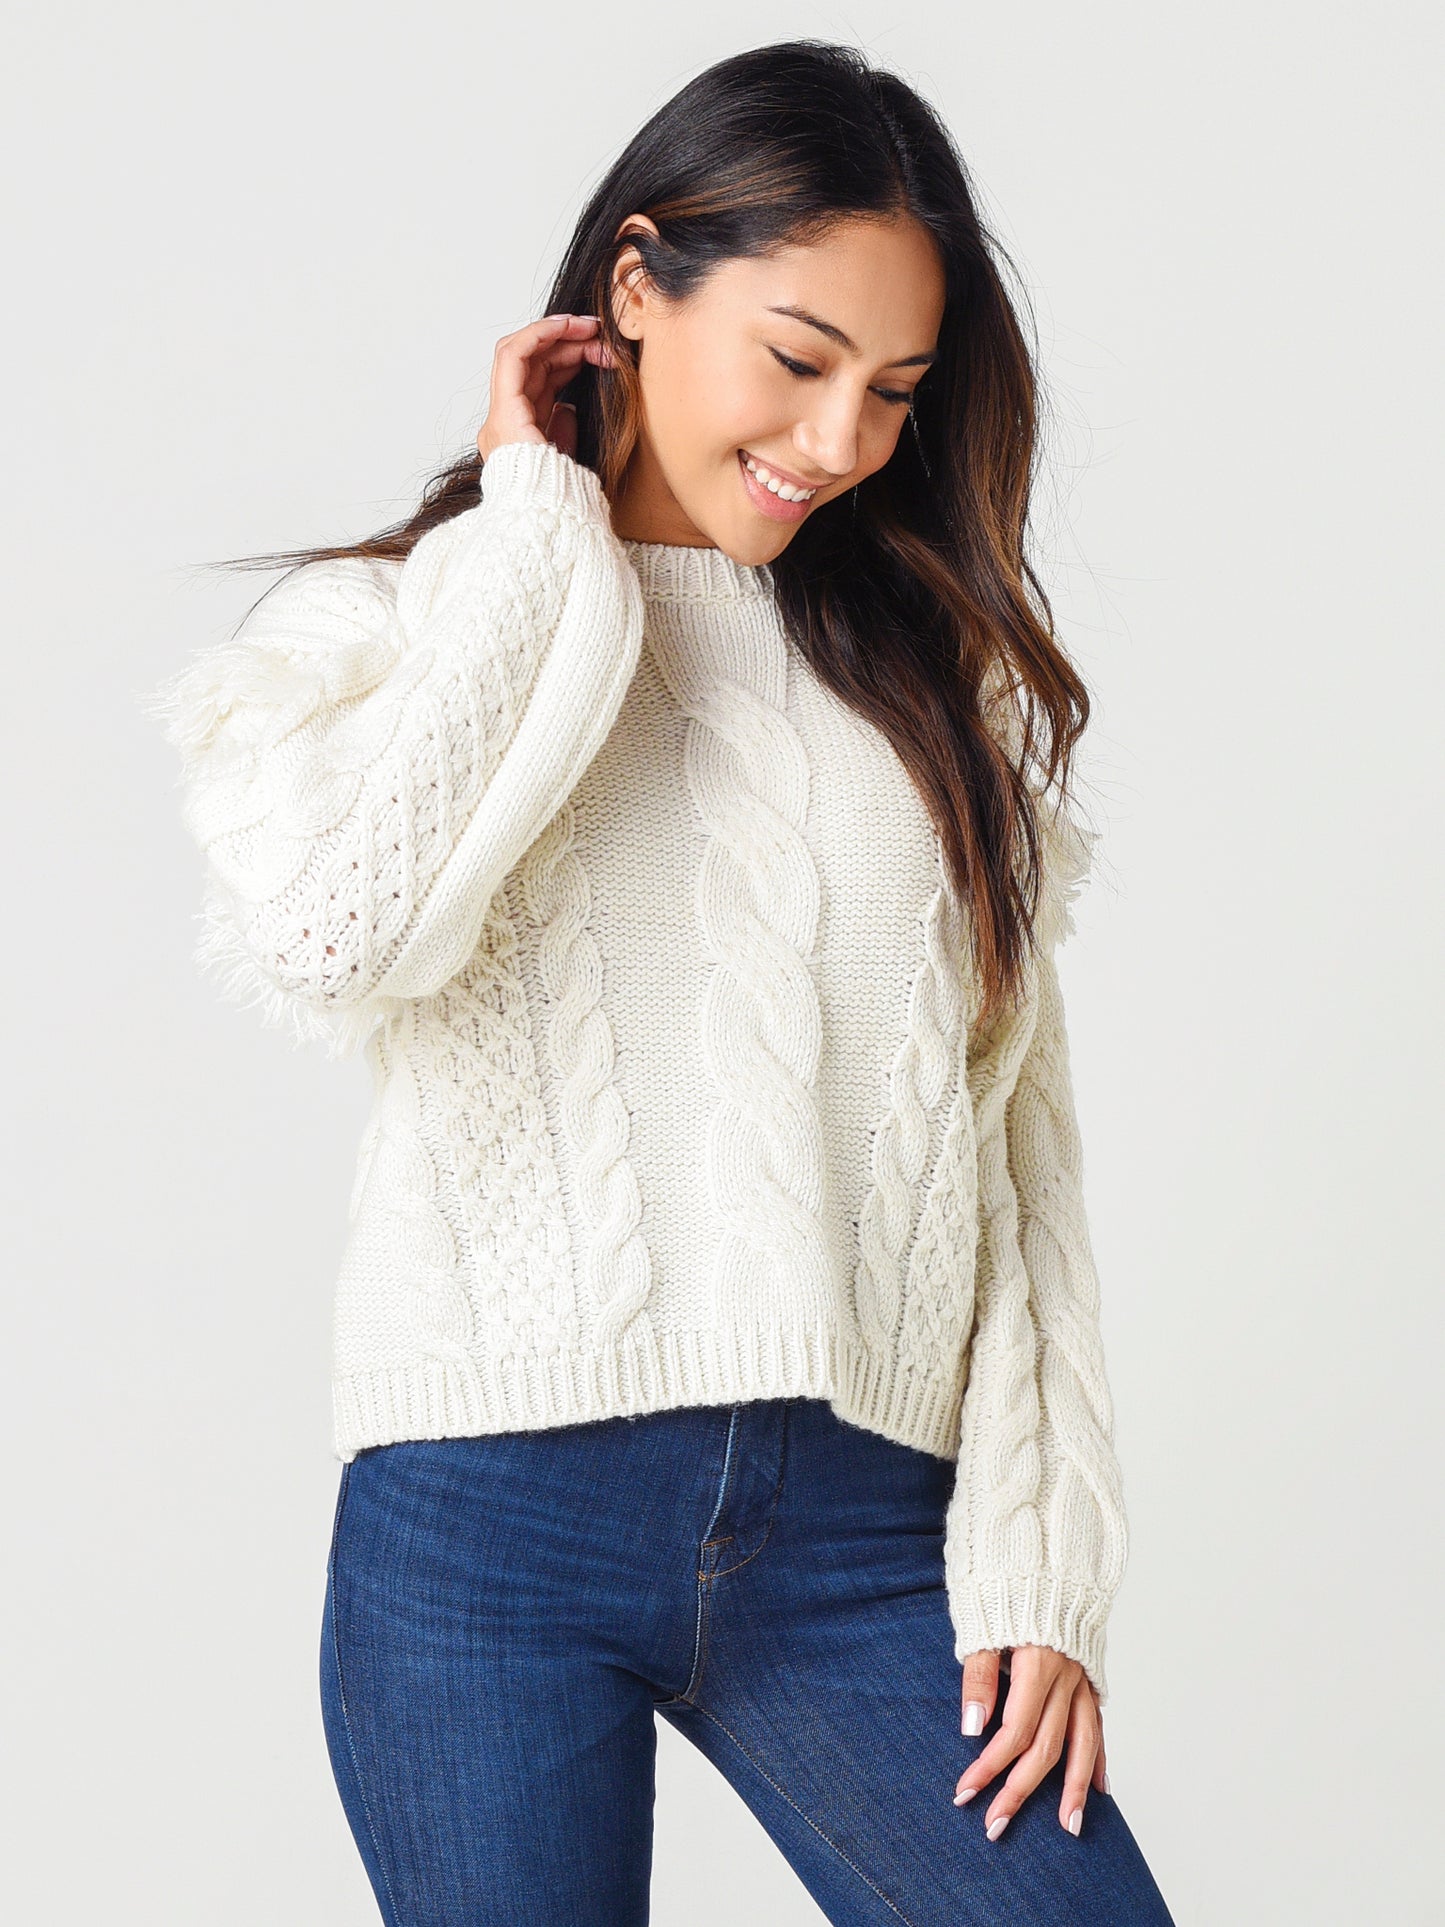 Cupcakes And Cashmere Women's Solstice Sweater